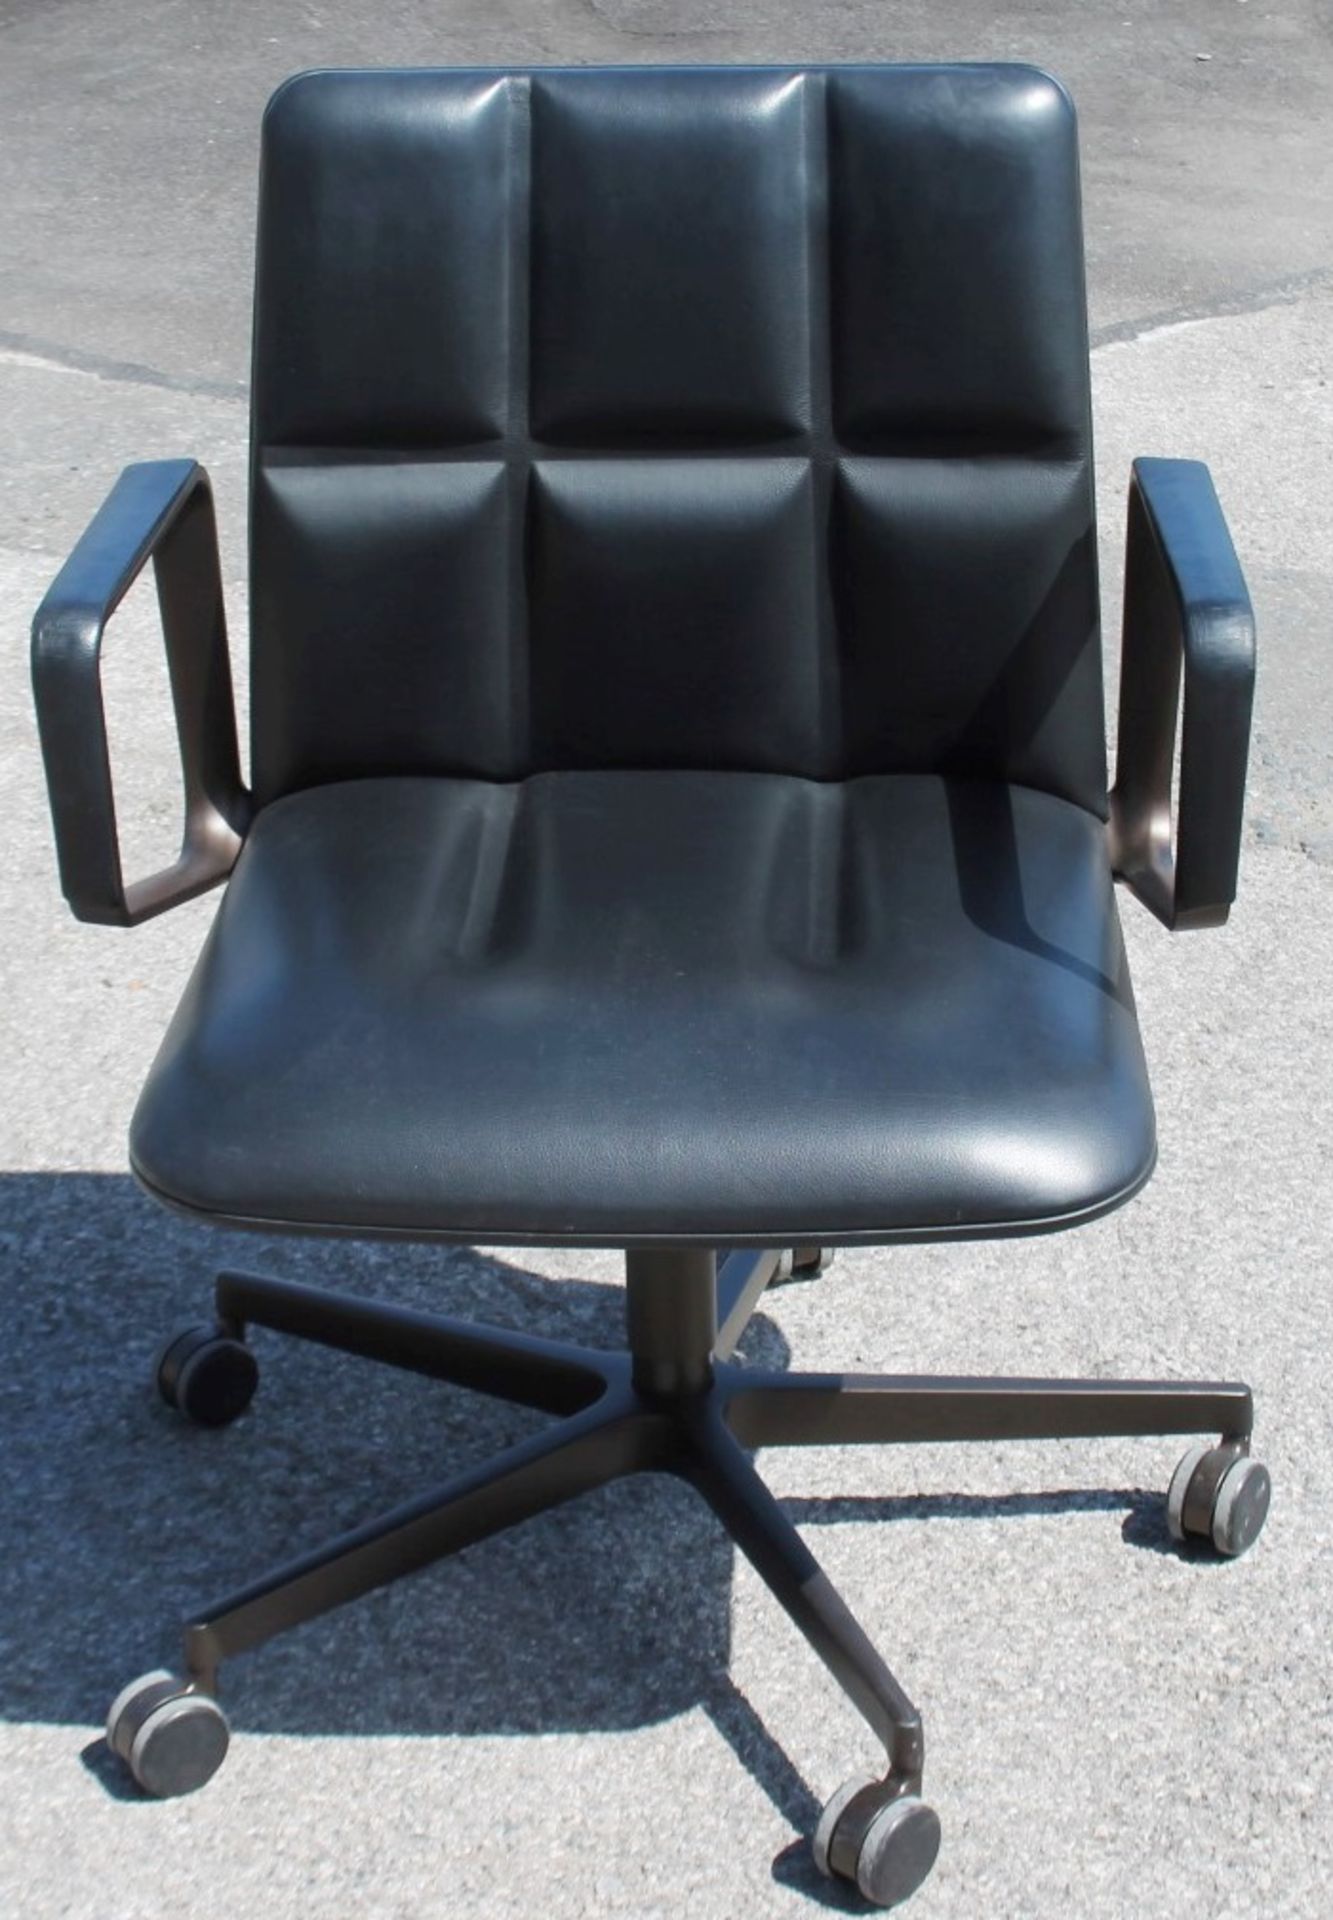 1 x WALTER KNOLL 'Leadchair' Executive Meeting Chair In Genuine Leather - Original RRP £4,250 - - Image 4 of 8